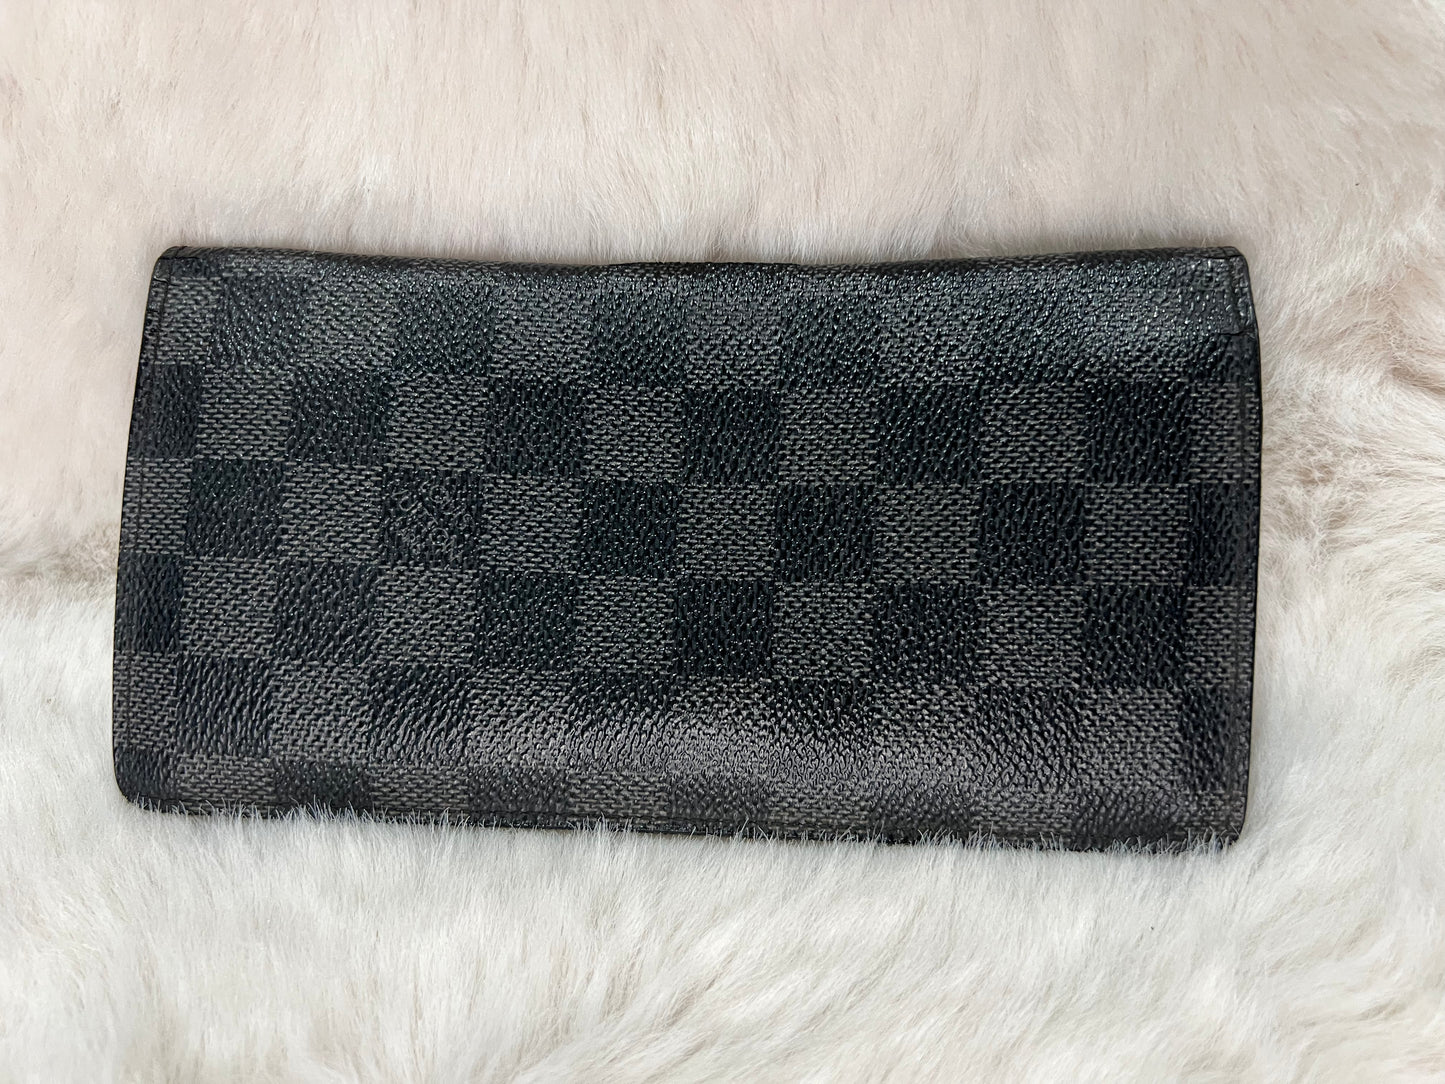 Damier Graphite Portefeuille Brother Wallet - $165 plus $10 shipping